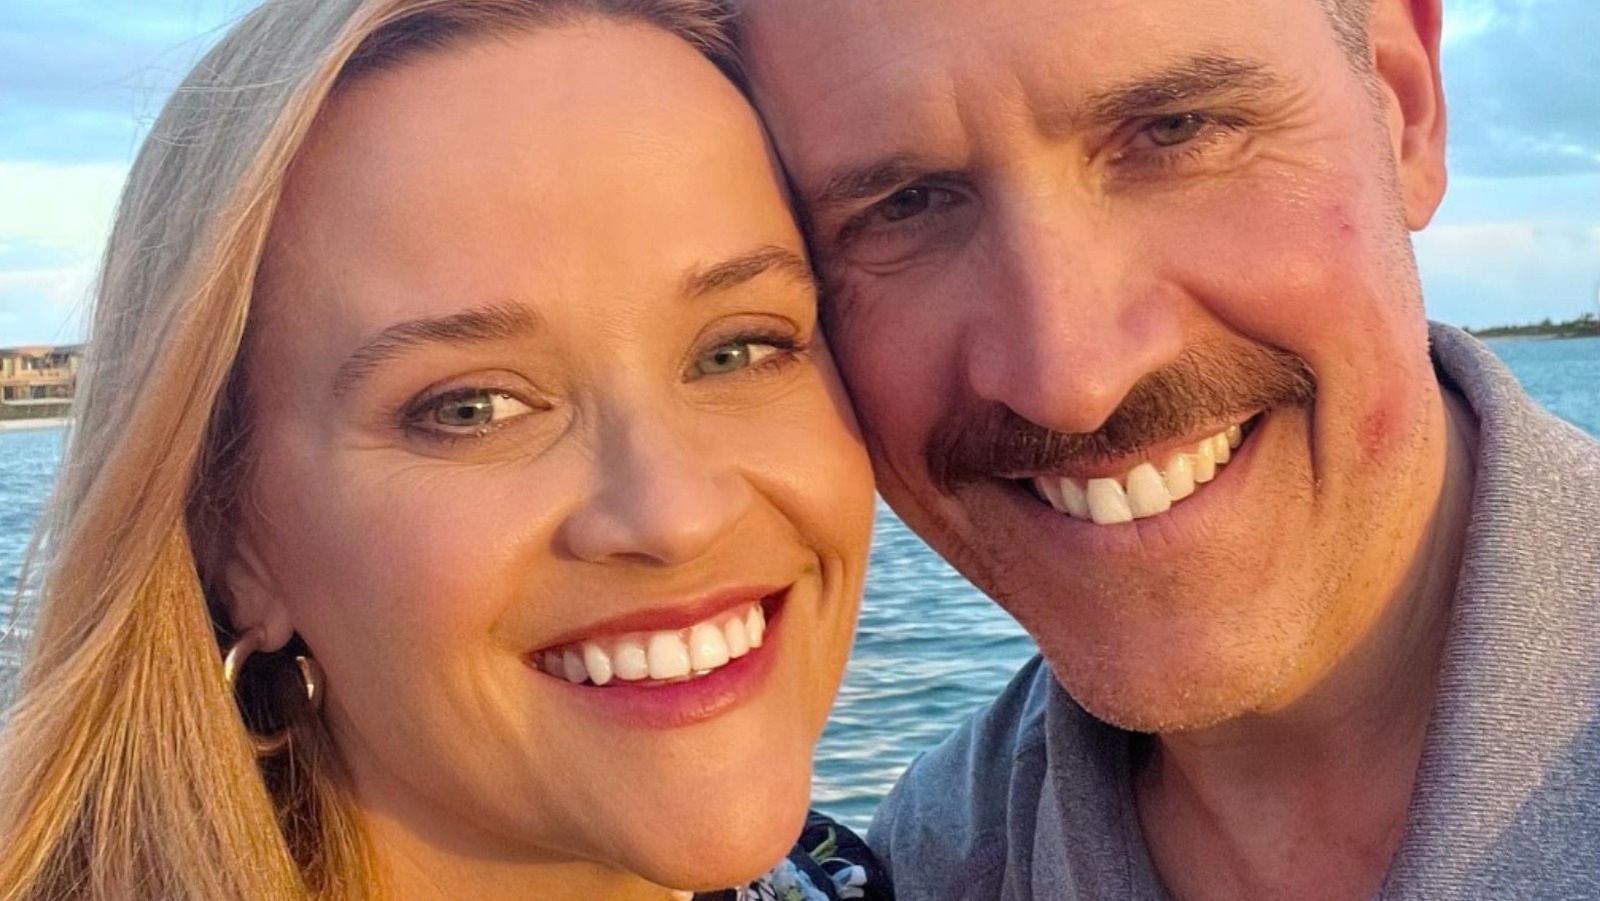 The True Story Of How Reese Witherspoon Met Her Husband Jim Toth